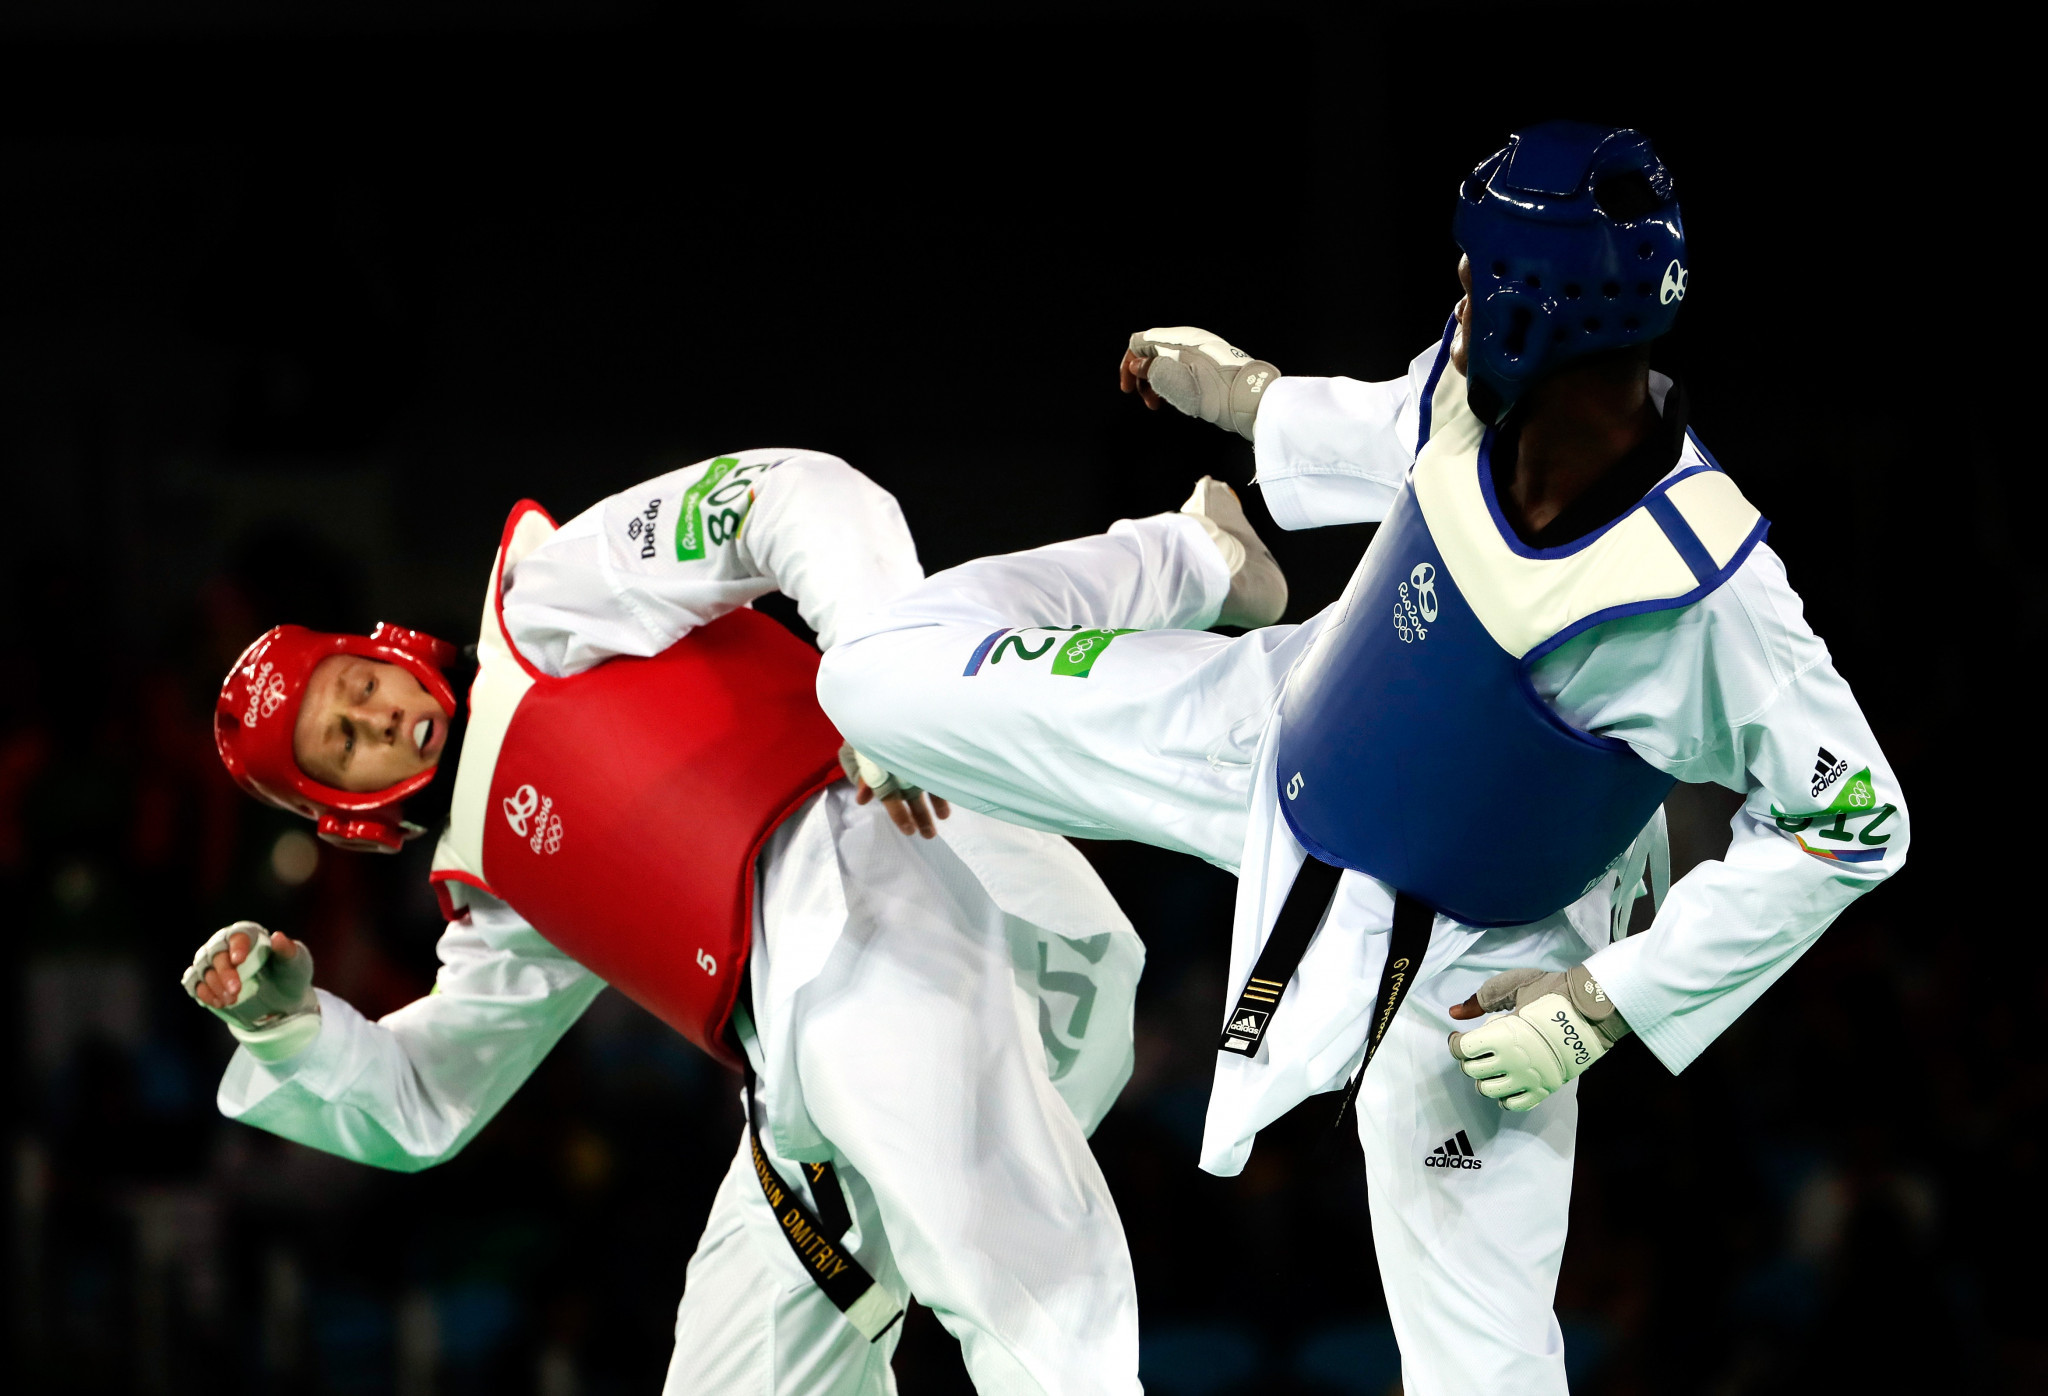 George Ashiru hopes to boost the number of taekwondo athletes in Nigeria ©Getty Images